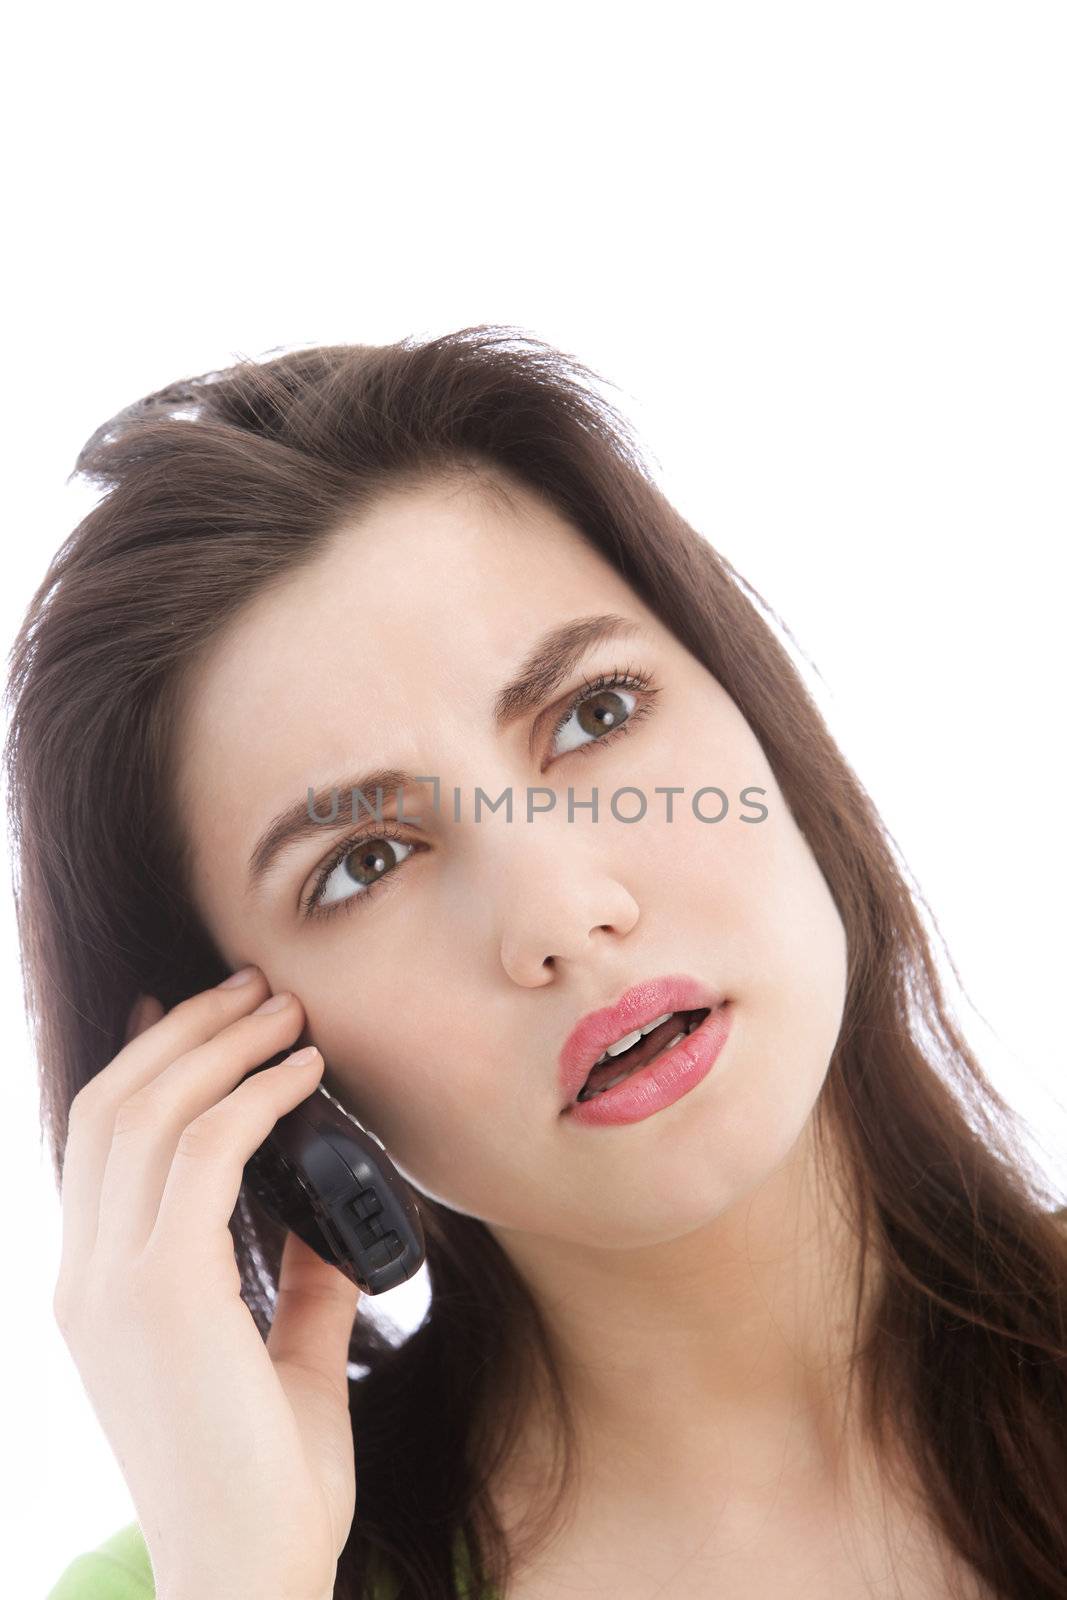 Attractive young woman listening to a call on a mobile phone looking up in consternation as she concentrates on what is being said